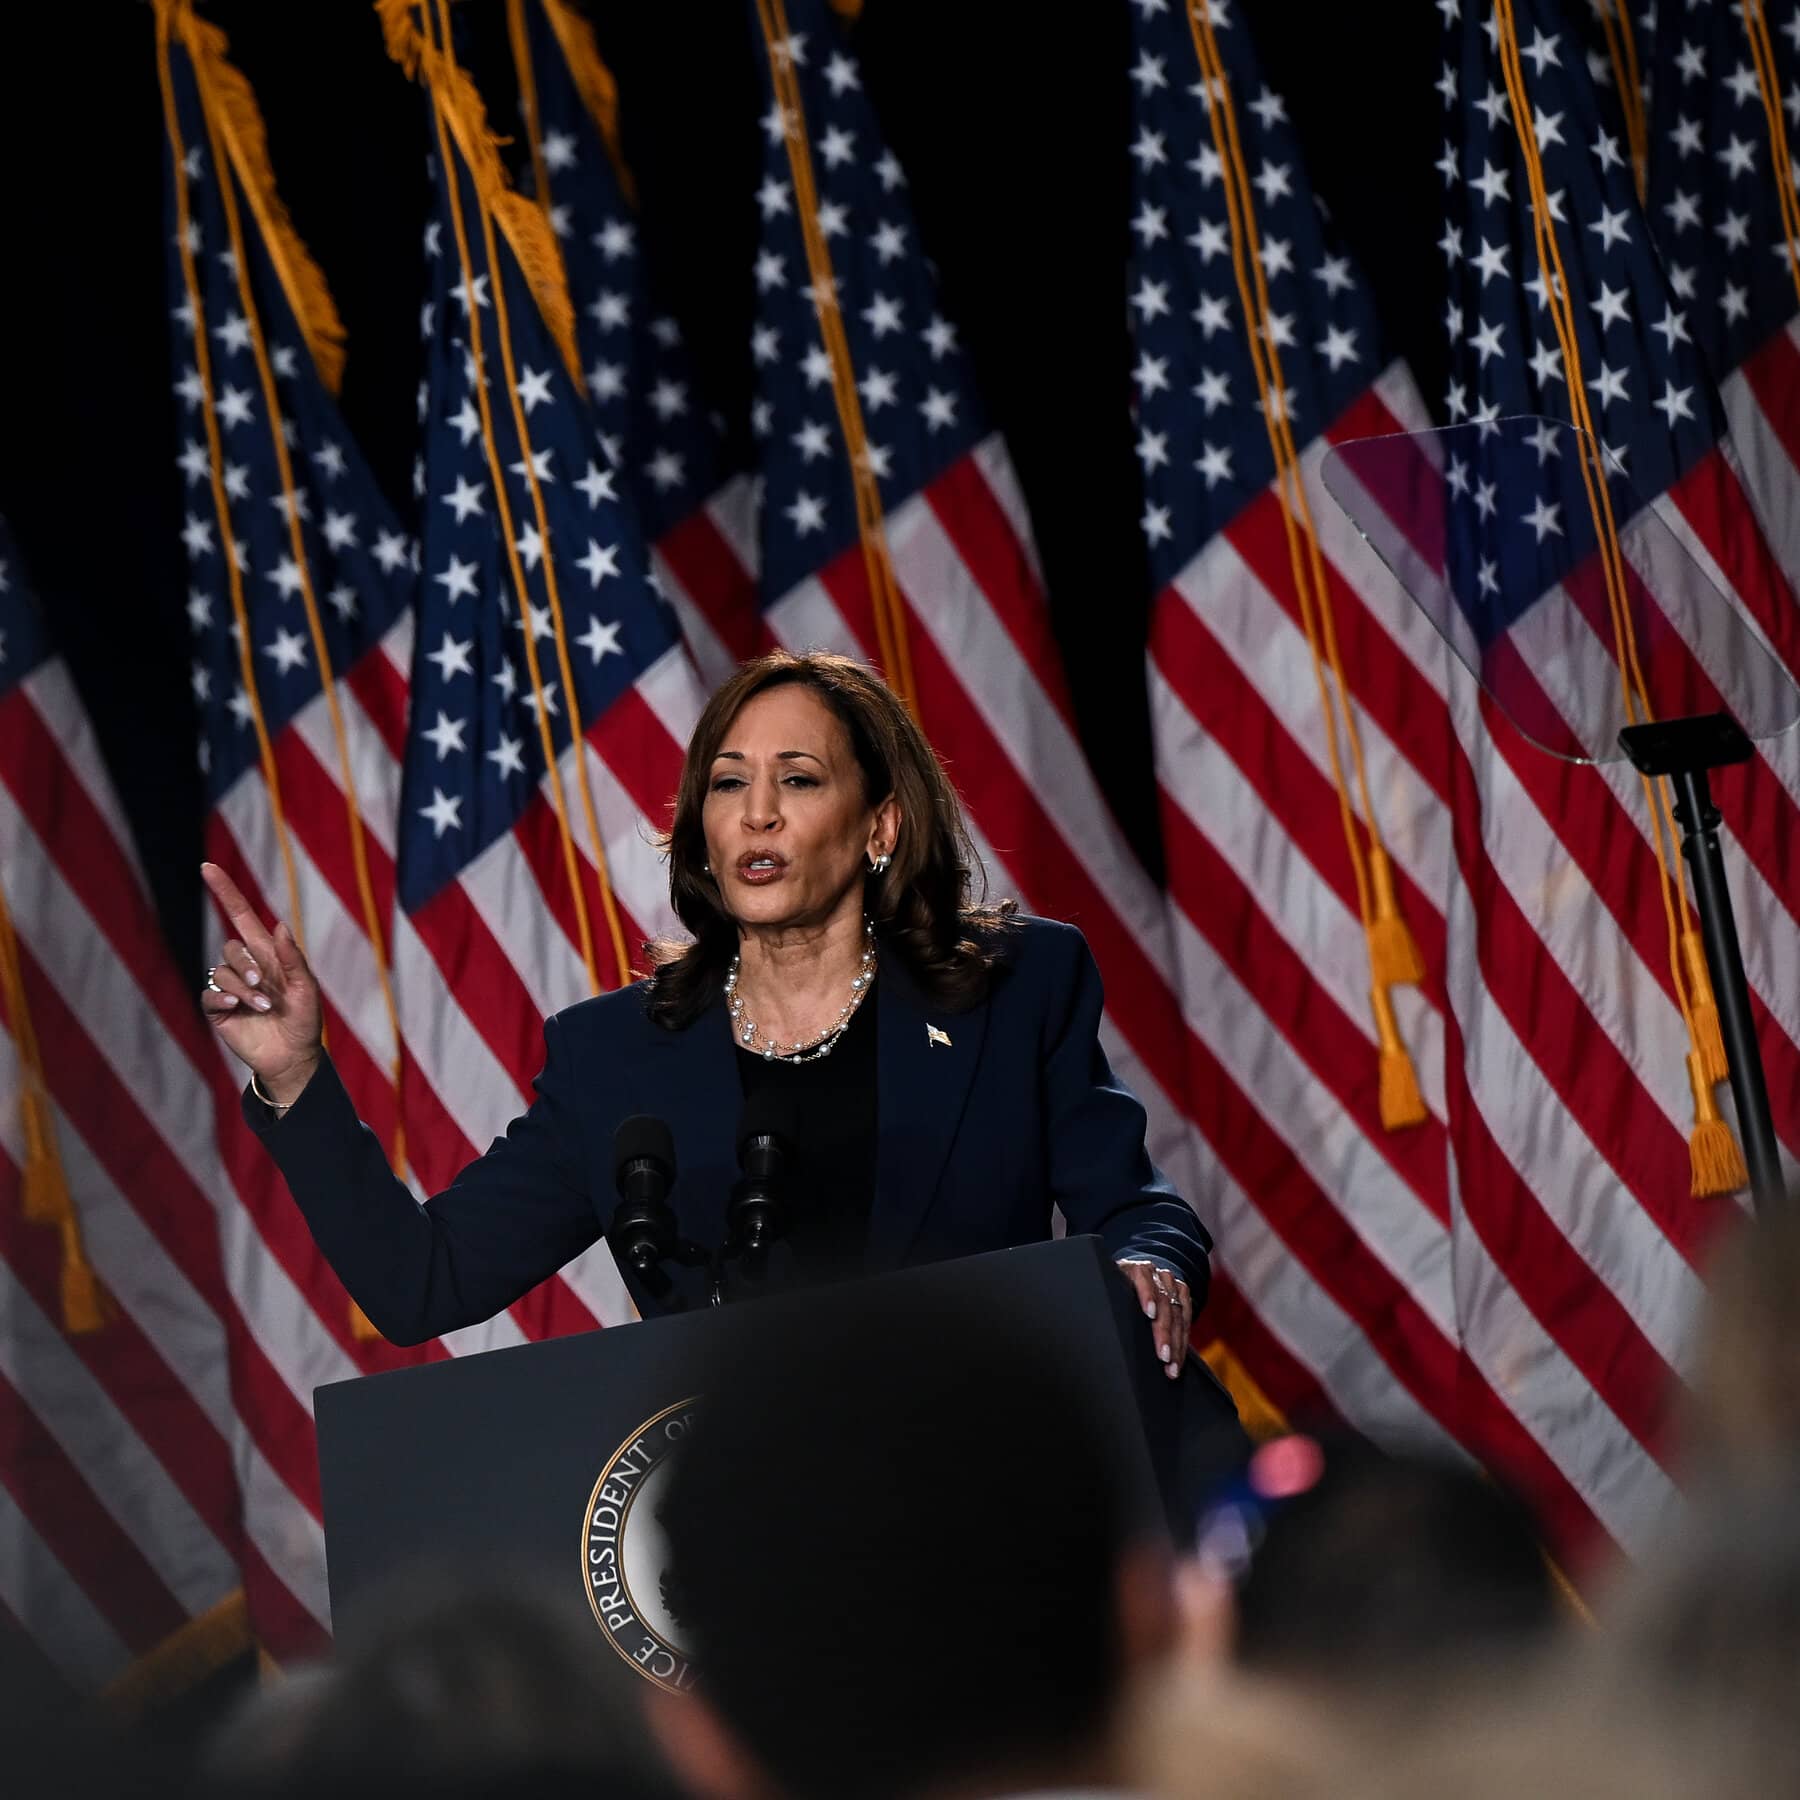 What to Know About Kamala Harris’s Foreign Policy Positions